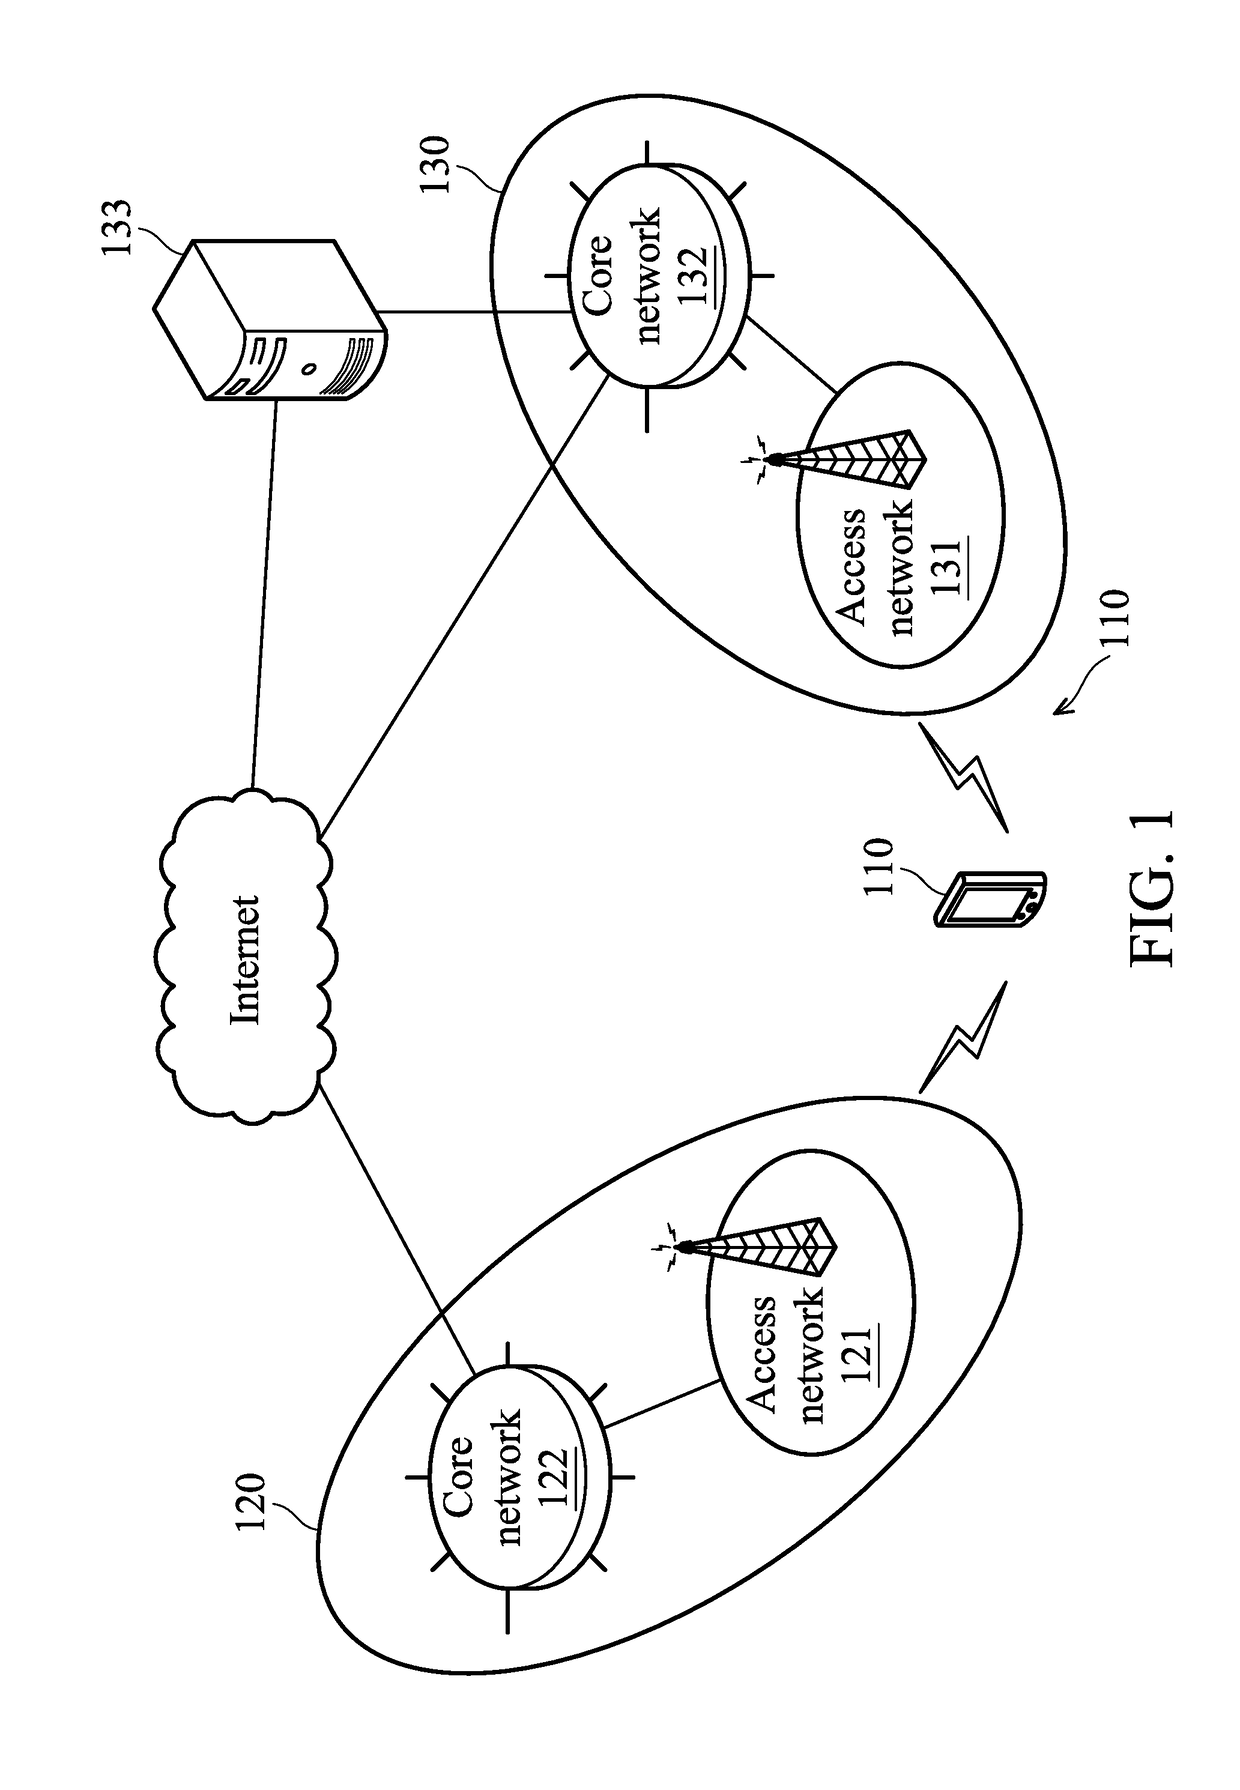 Apparatuses and methods for coordinating communication operations associated with a plurality of subscriber identity cards in a mobile communication device with a single wireless transceiver